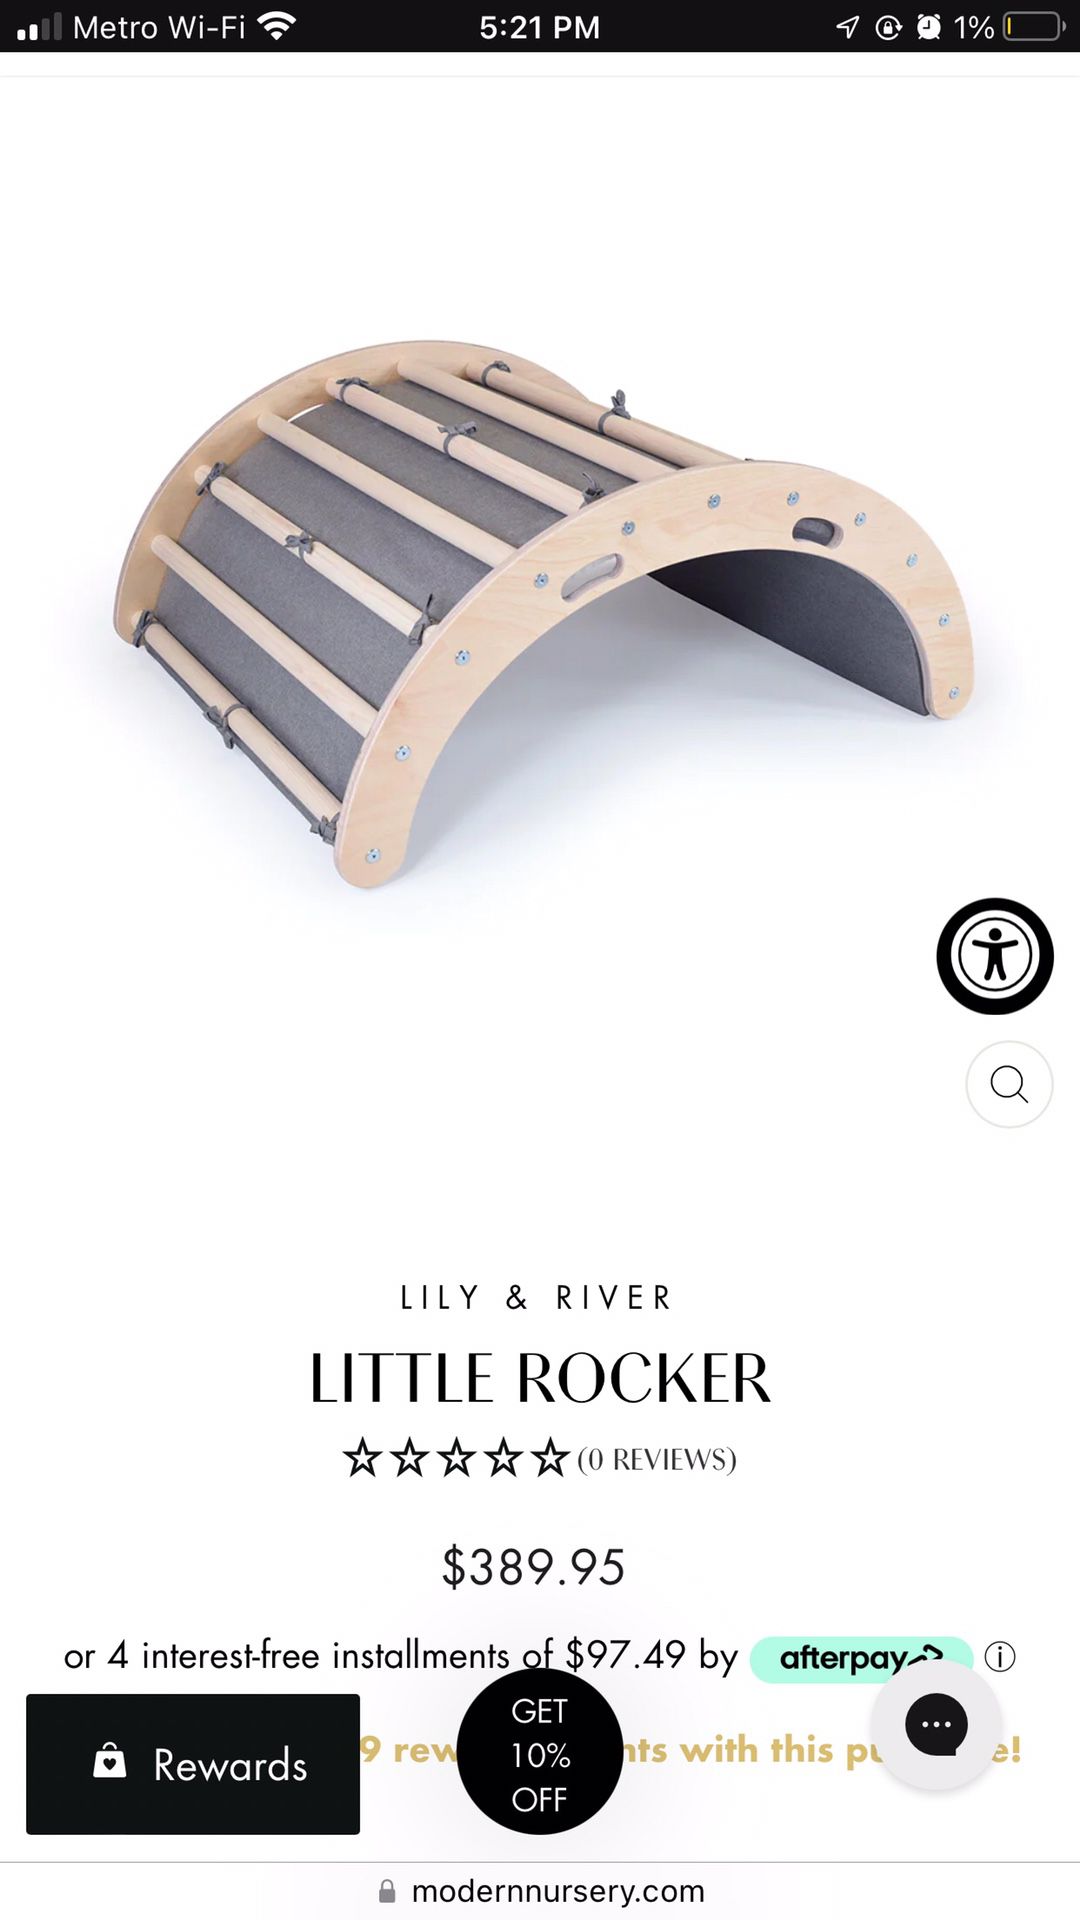 Lily & River Childrens Floor Seat/Rocker And Gym - Natural Wood